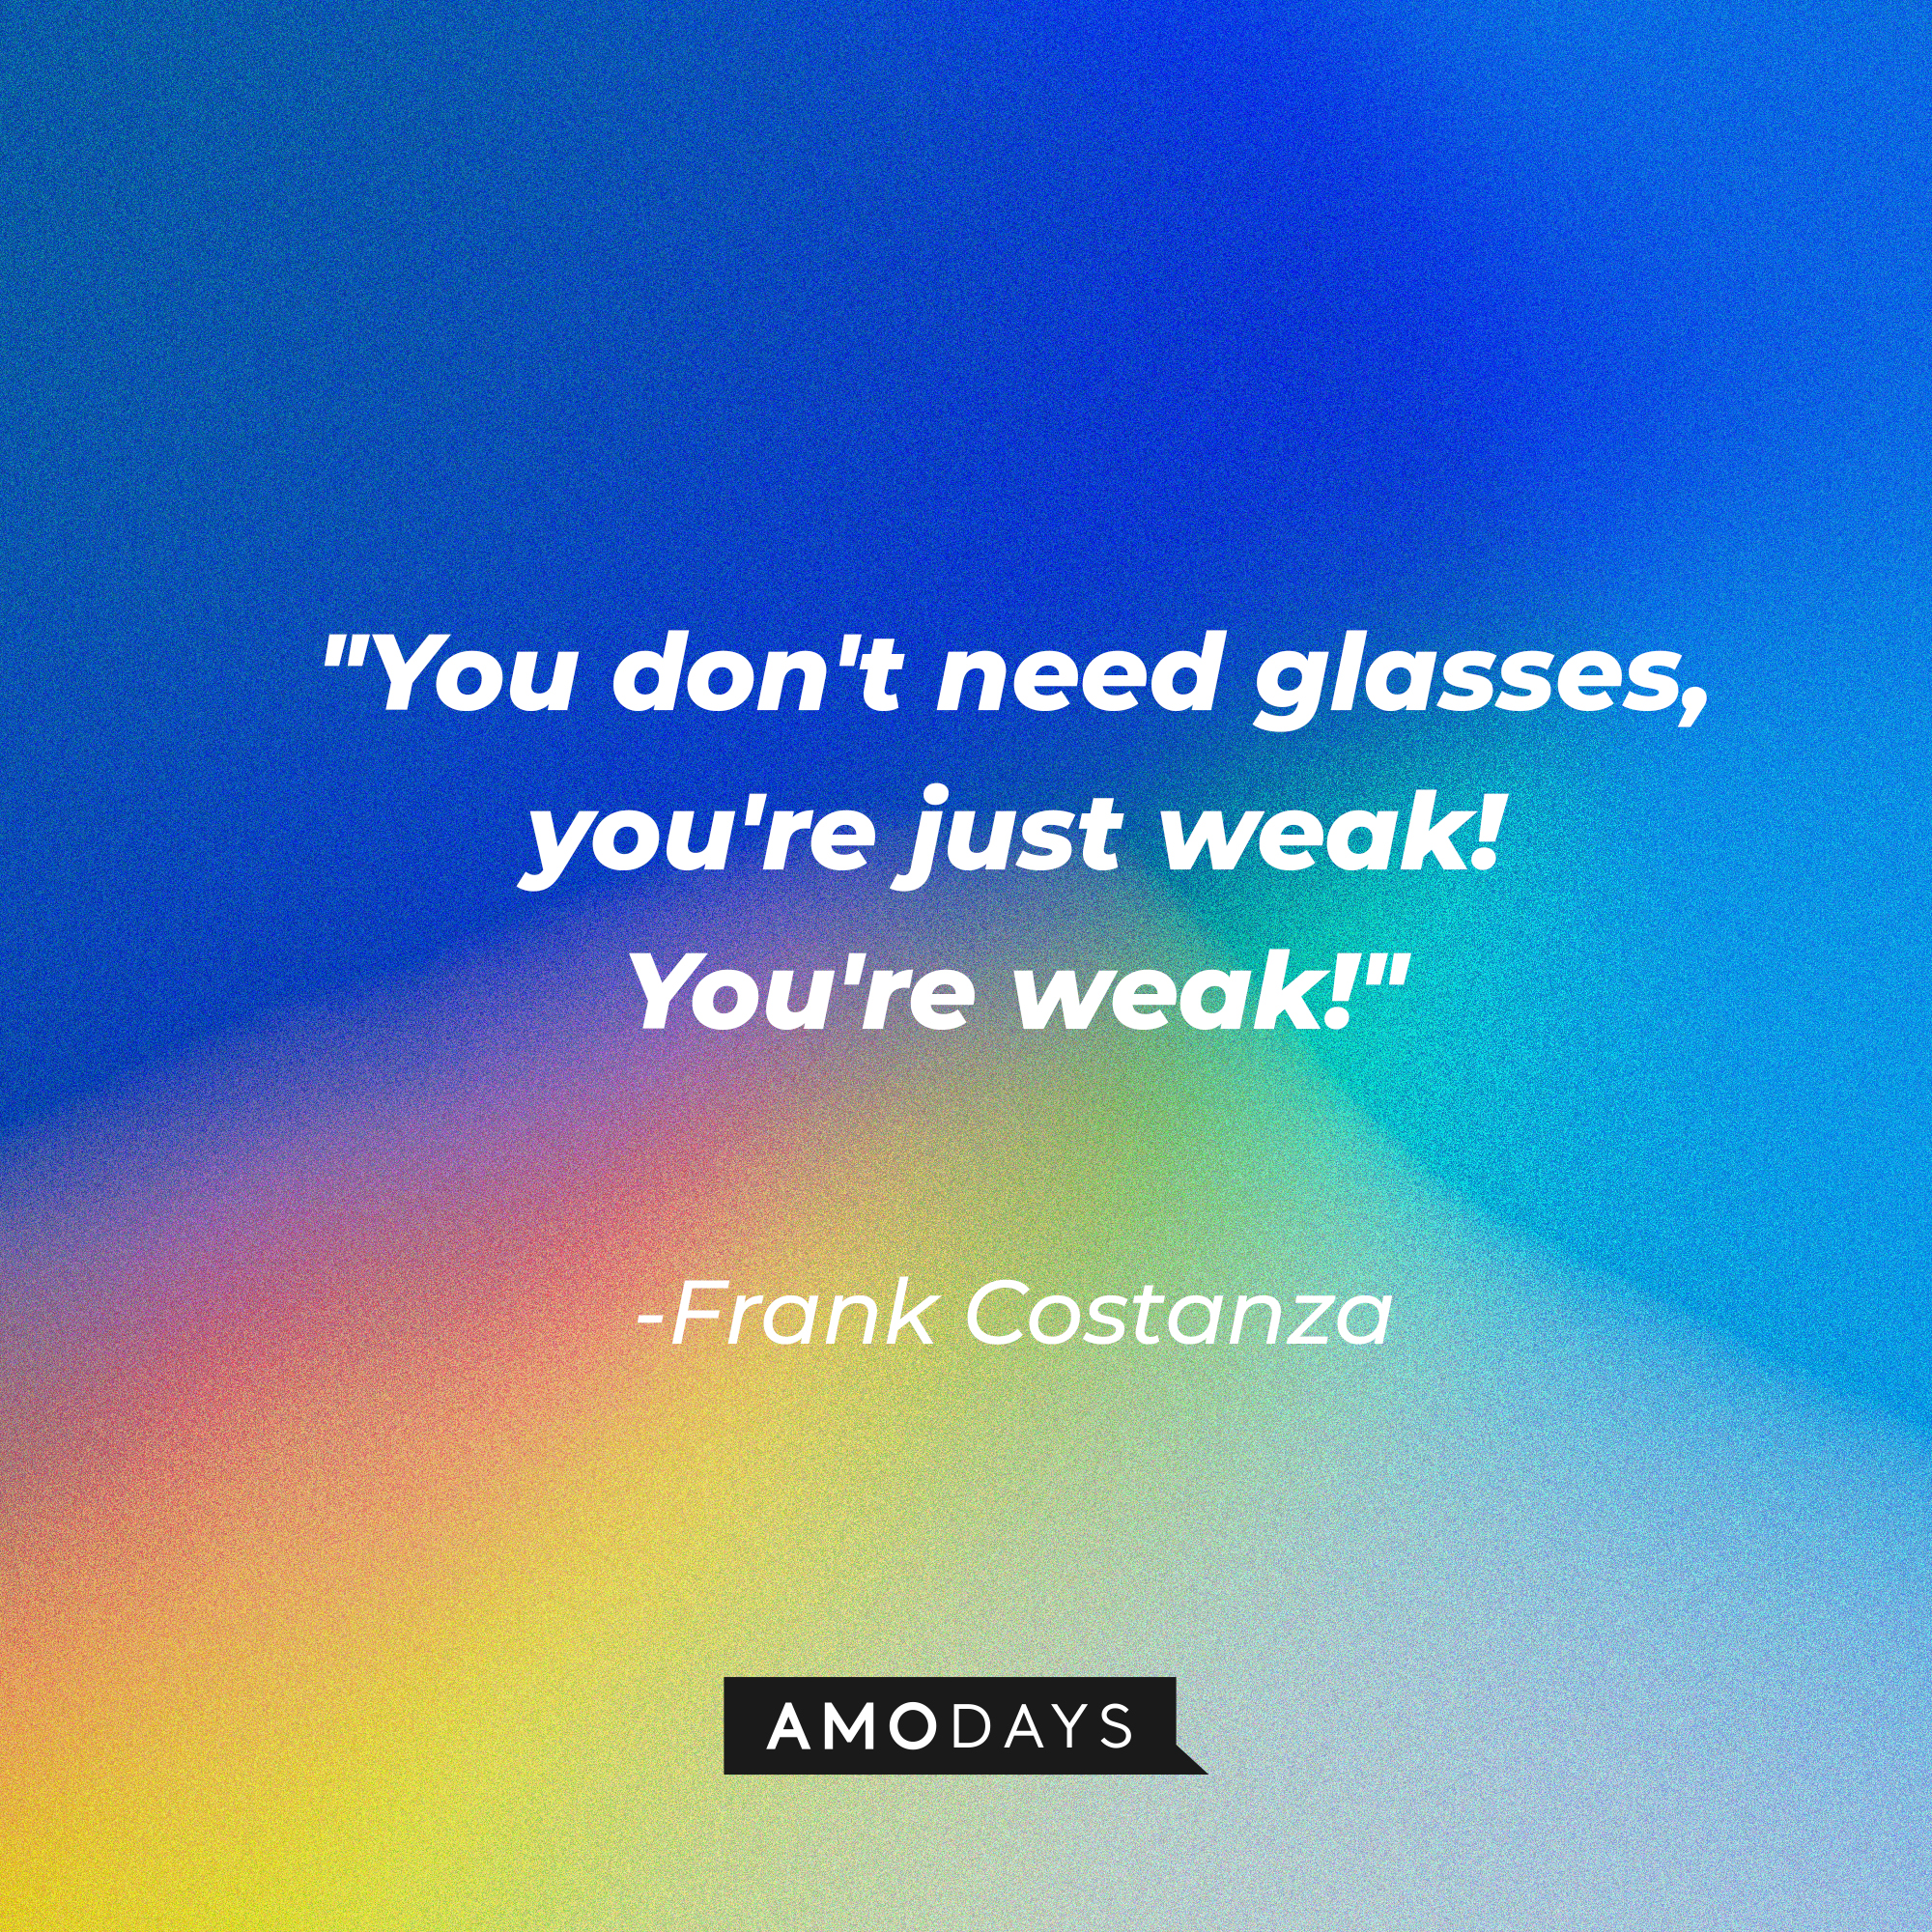 A photo with Frank Costanza's quote, "You don't need glasses, you're just weak! You're weak!" | Source: Amodays